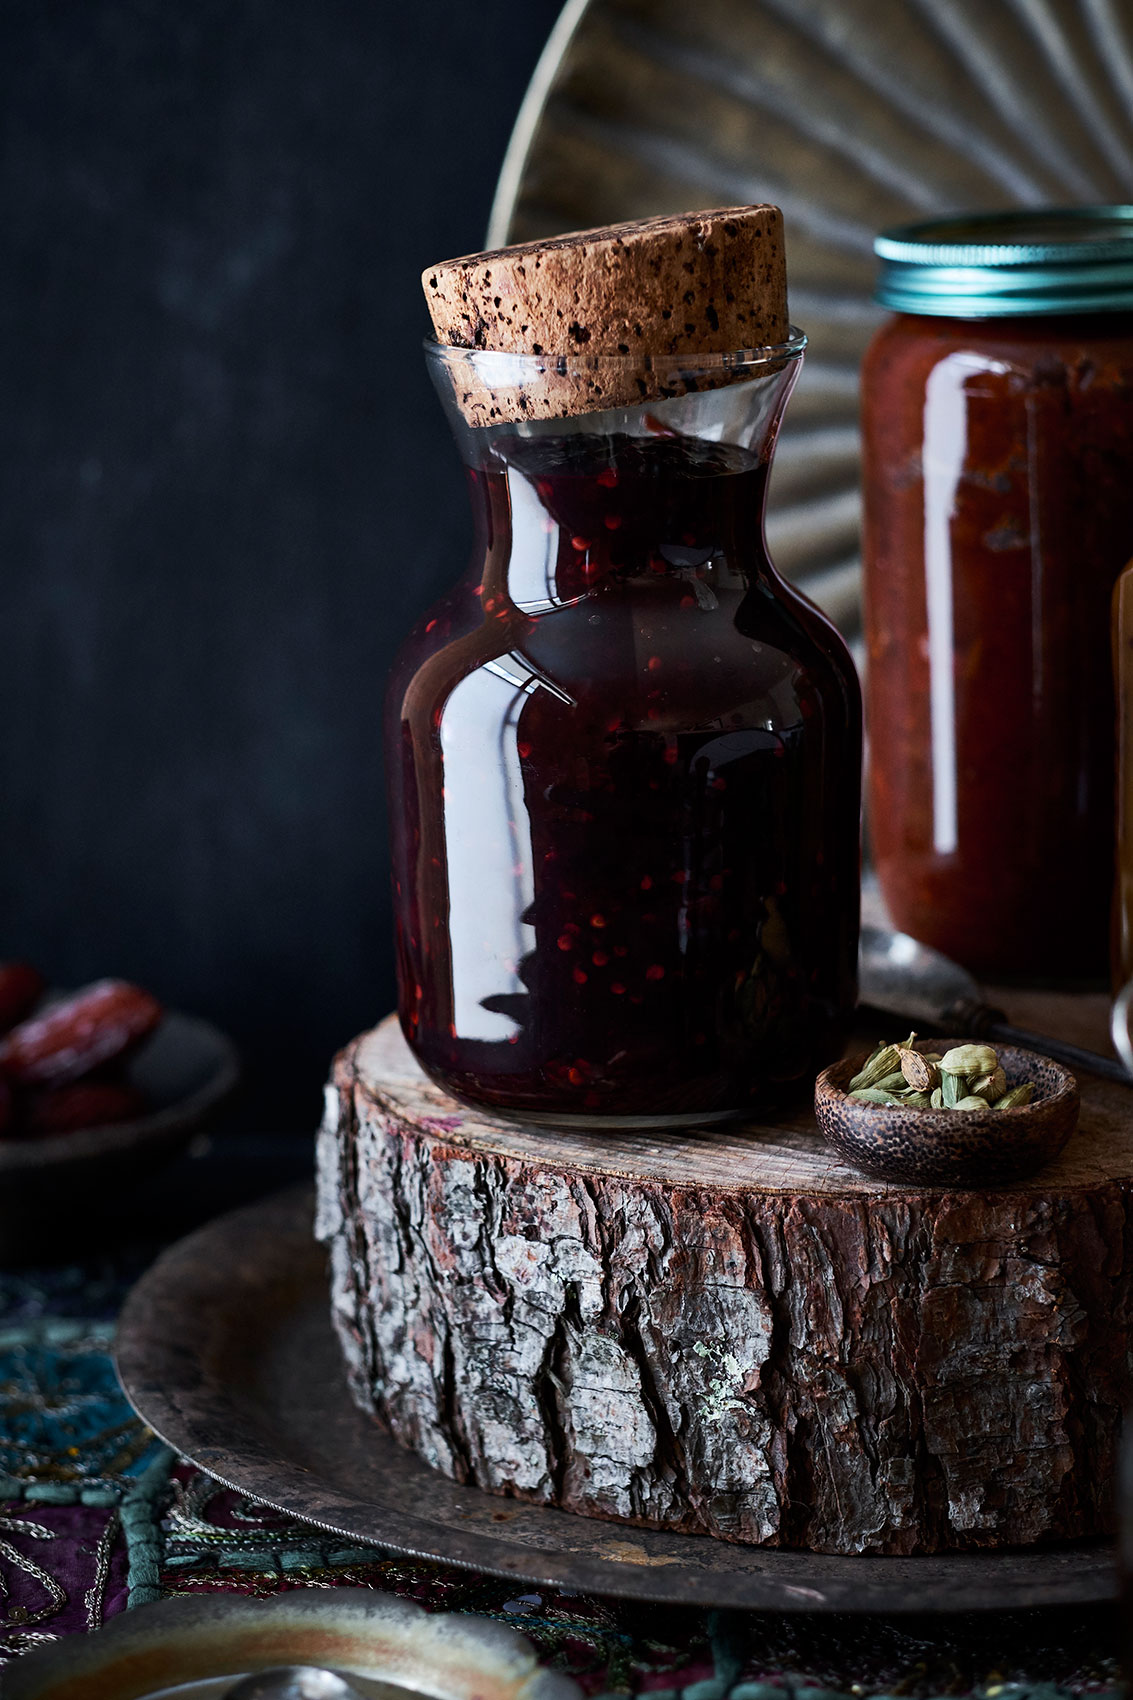 My Indian Kitchen • Home-Made Dark Chutney in Corked Glass Jar • Cookbook & Editorial Food Photography